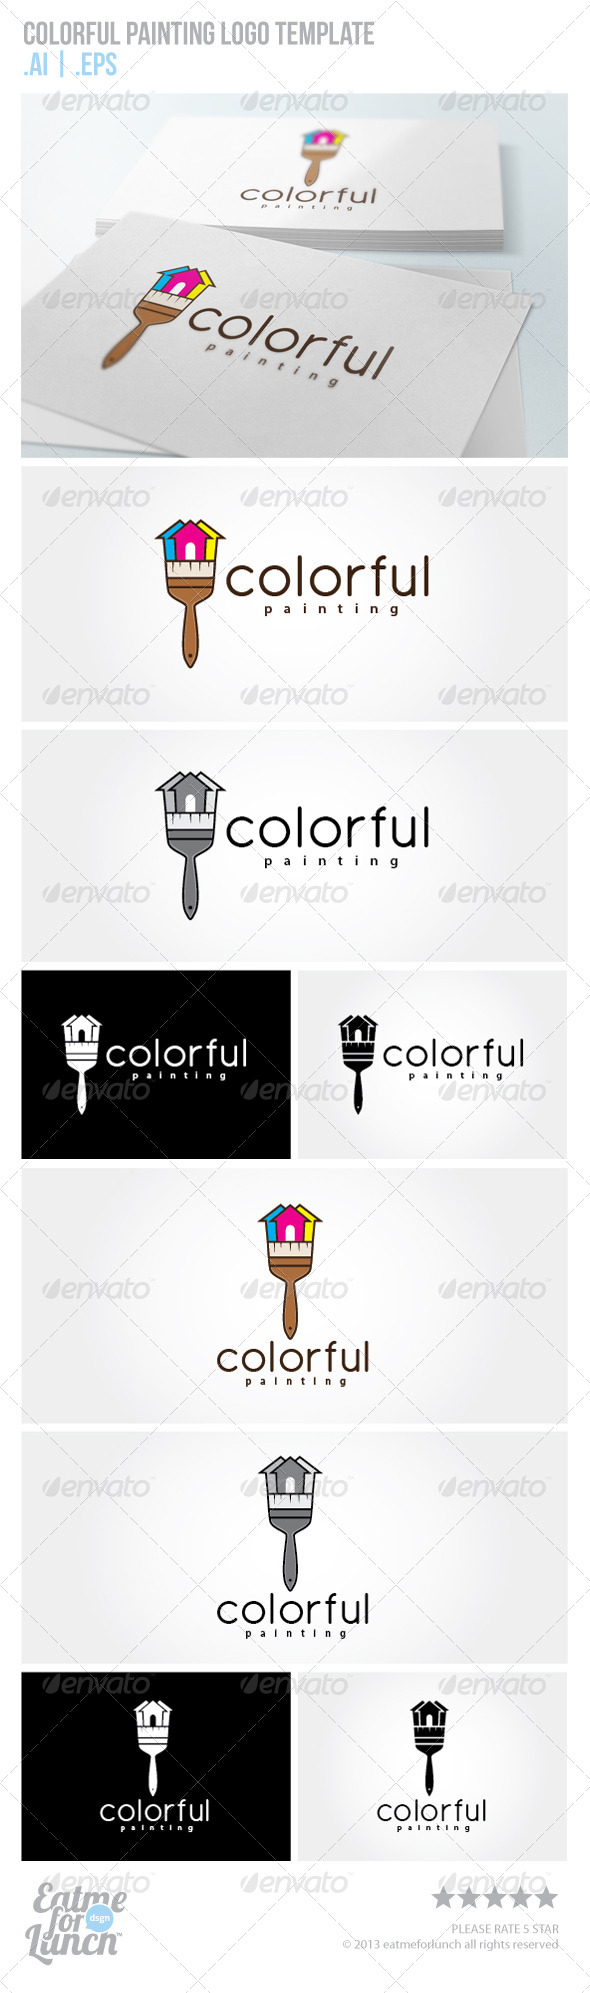 Colorful Painting Logo Template